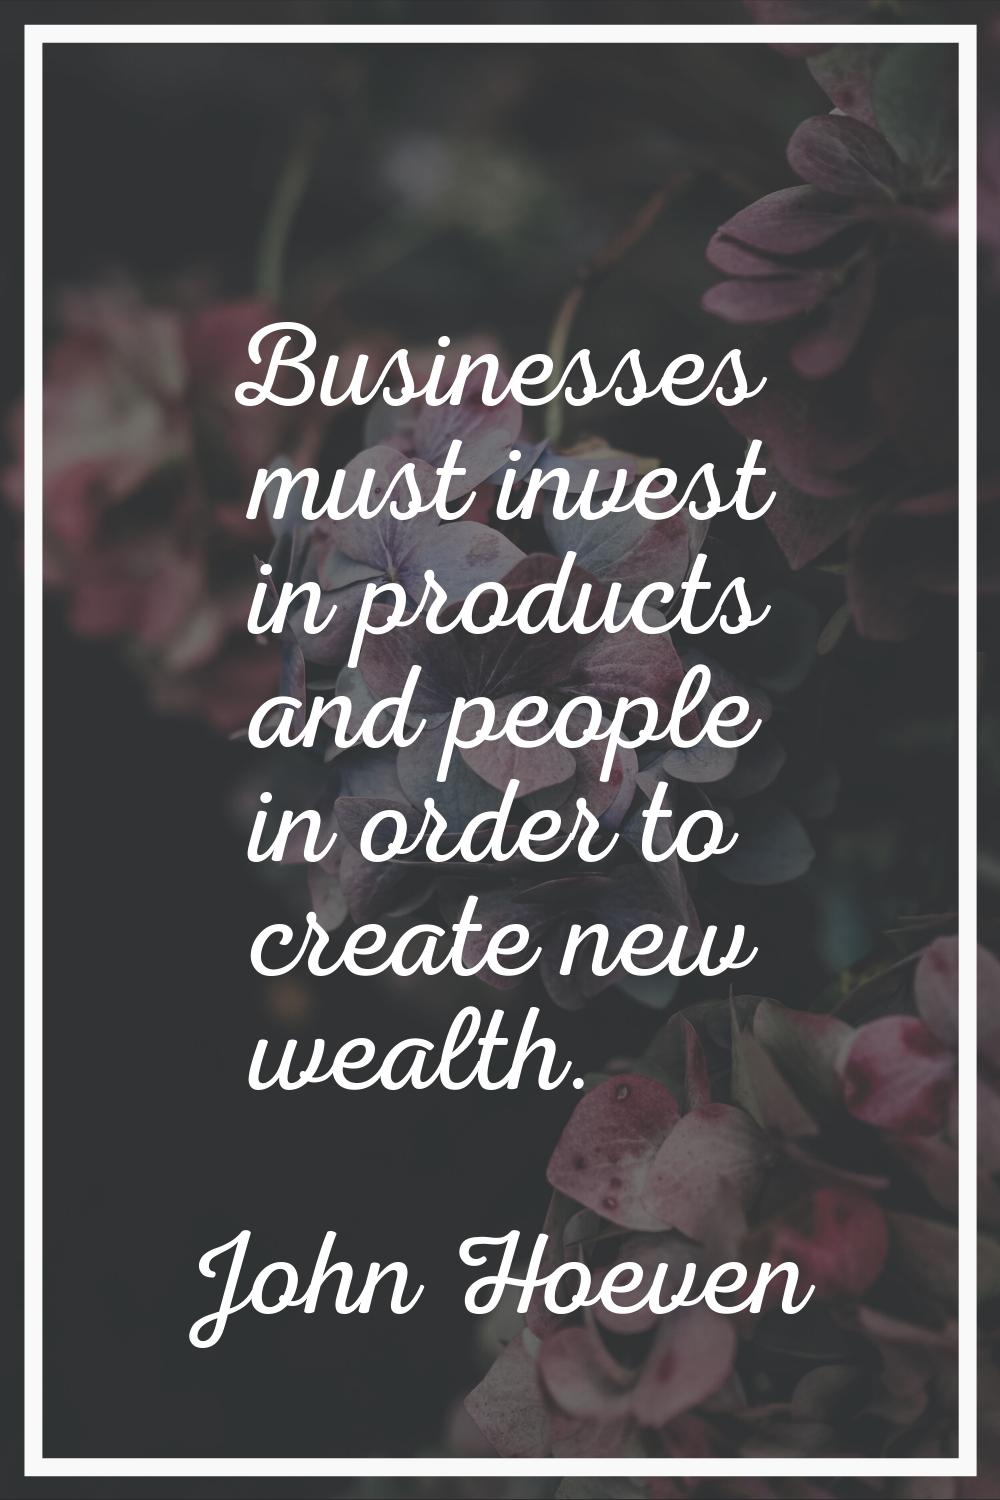 Businesses must invest in products and people in order to create new wealth.